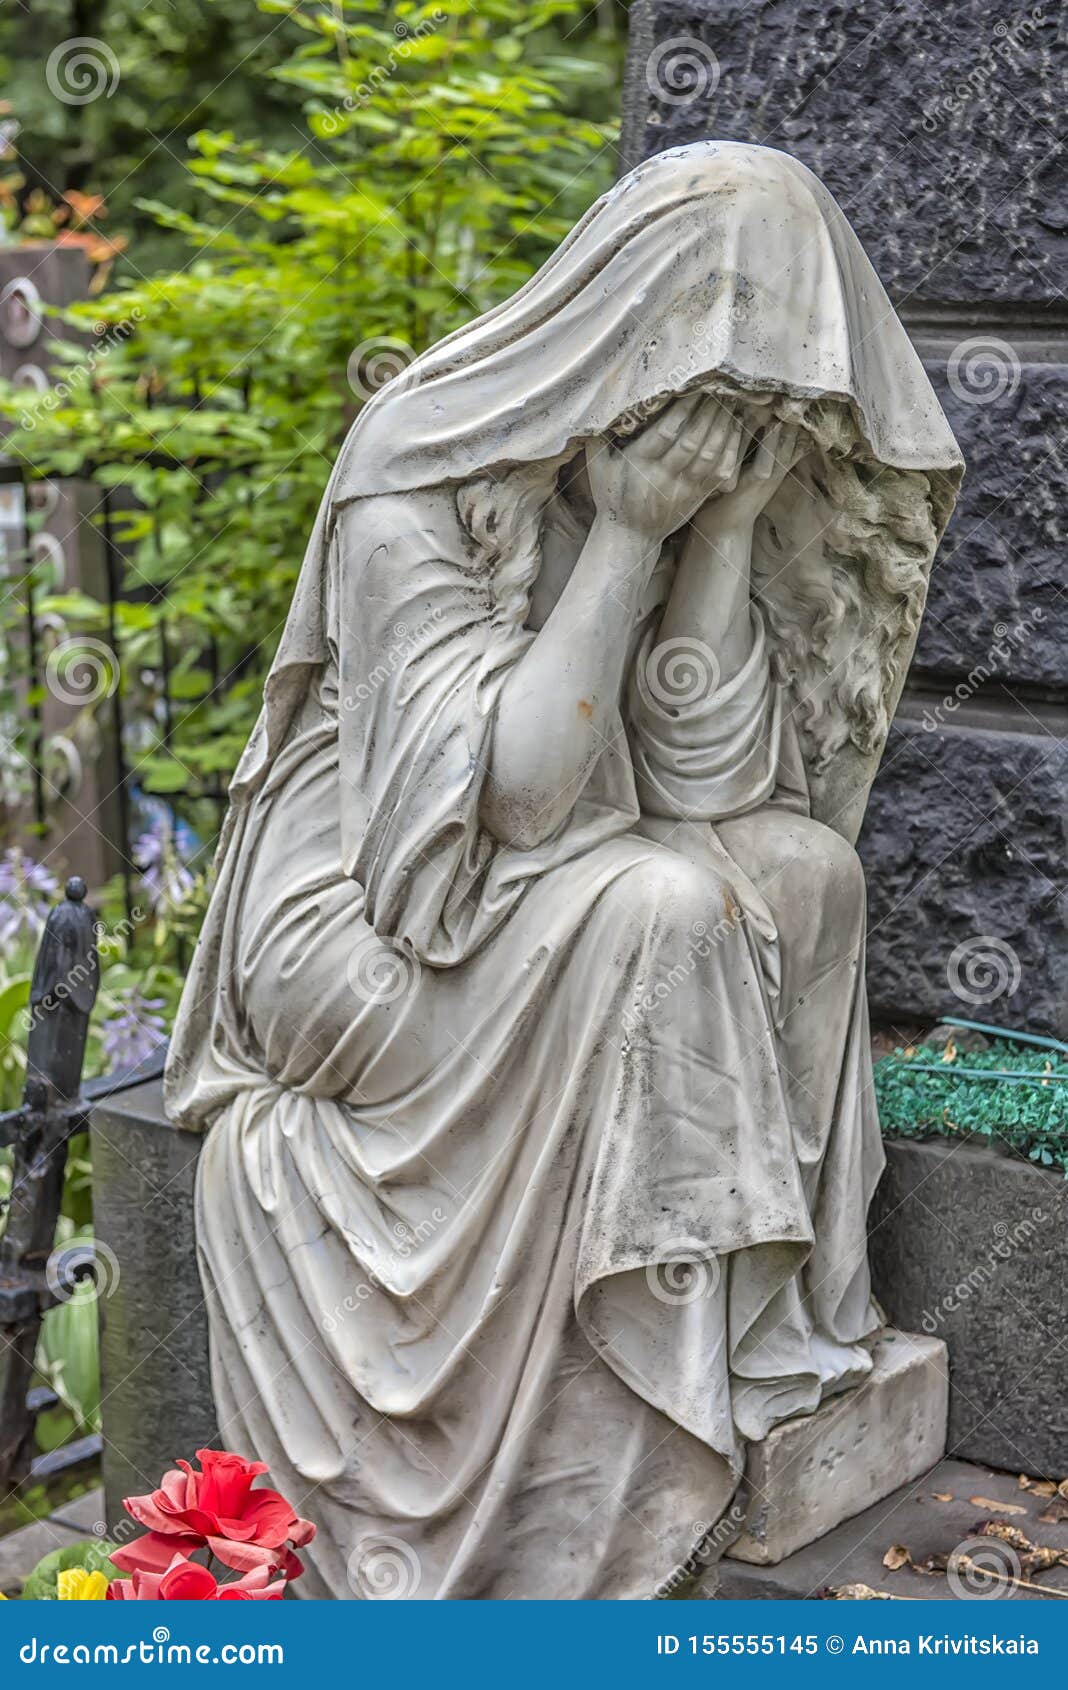 Sculpture Of A Grieving Woman On A Grave Editorial Image Image Of Female Church 155555145